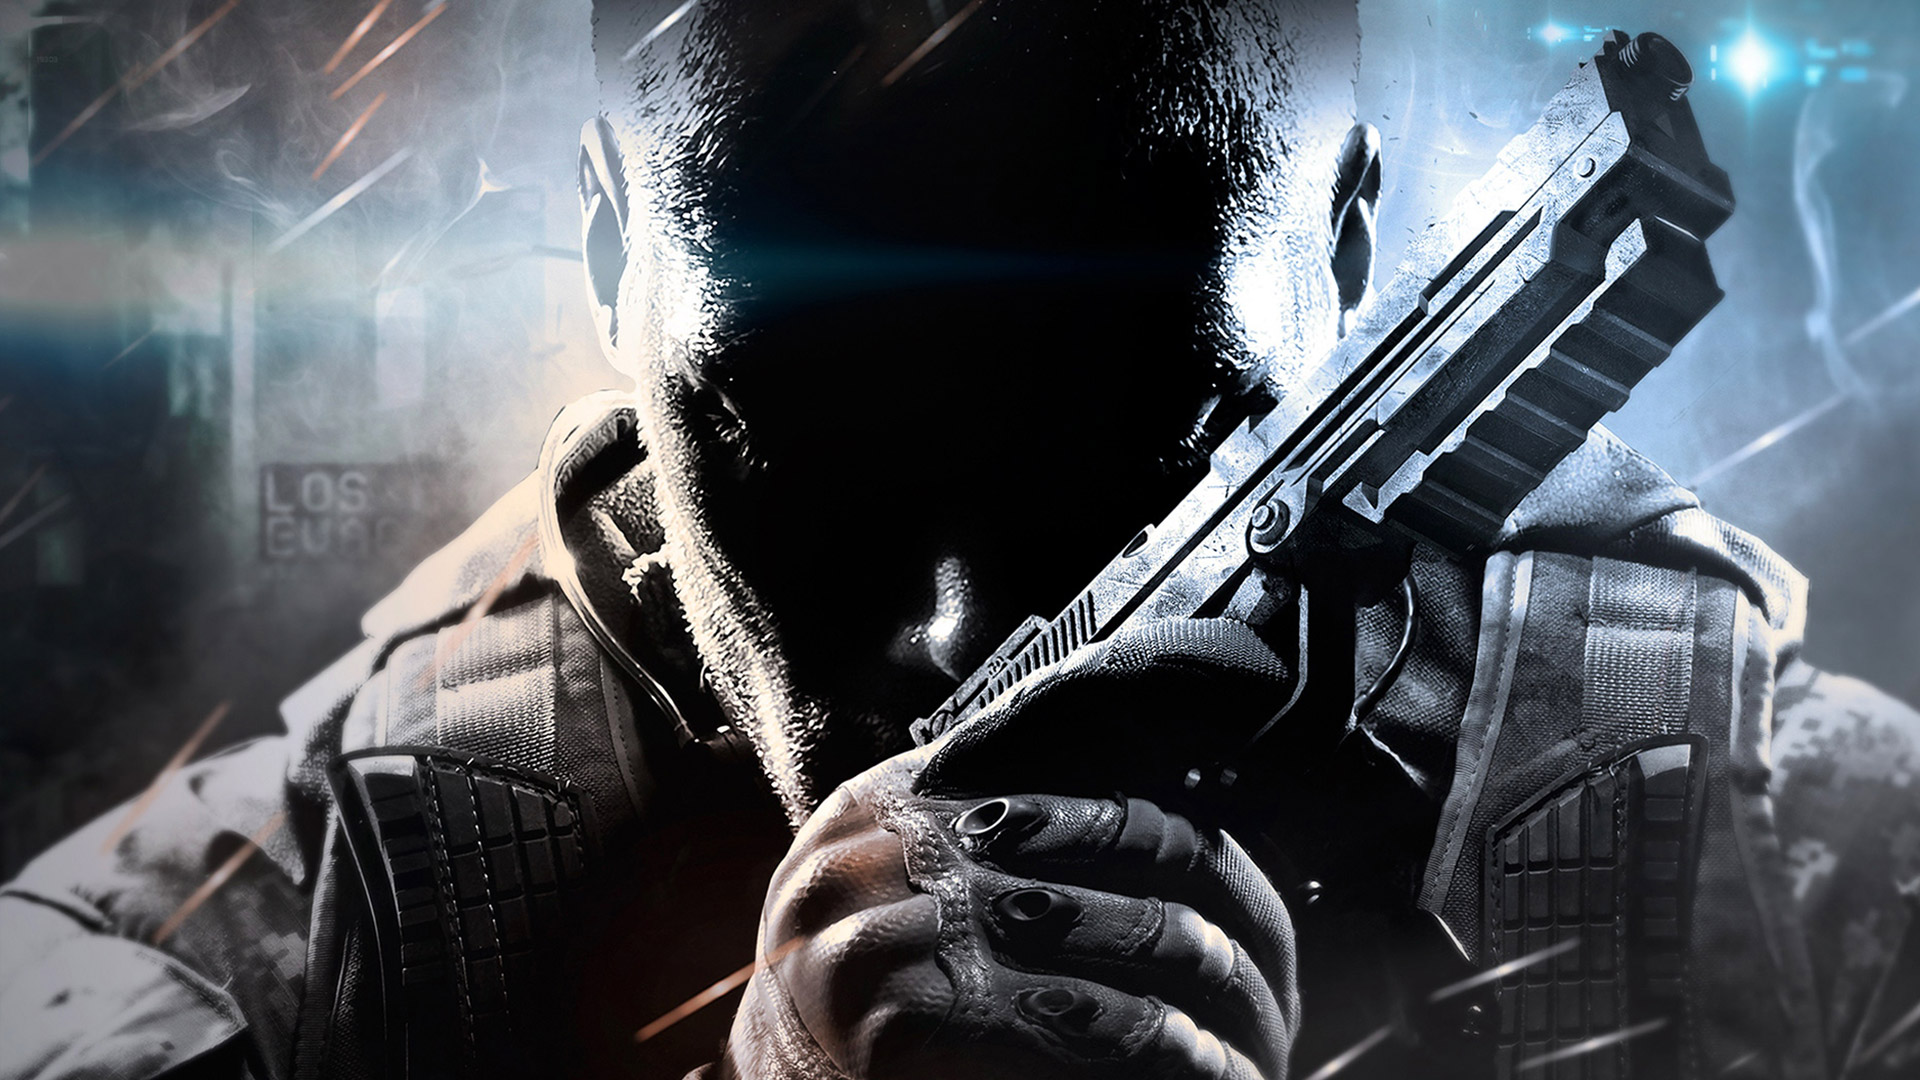 Free Call of Duty Black Ops 2 Wallpaper in 1920x1080 1920x1080